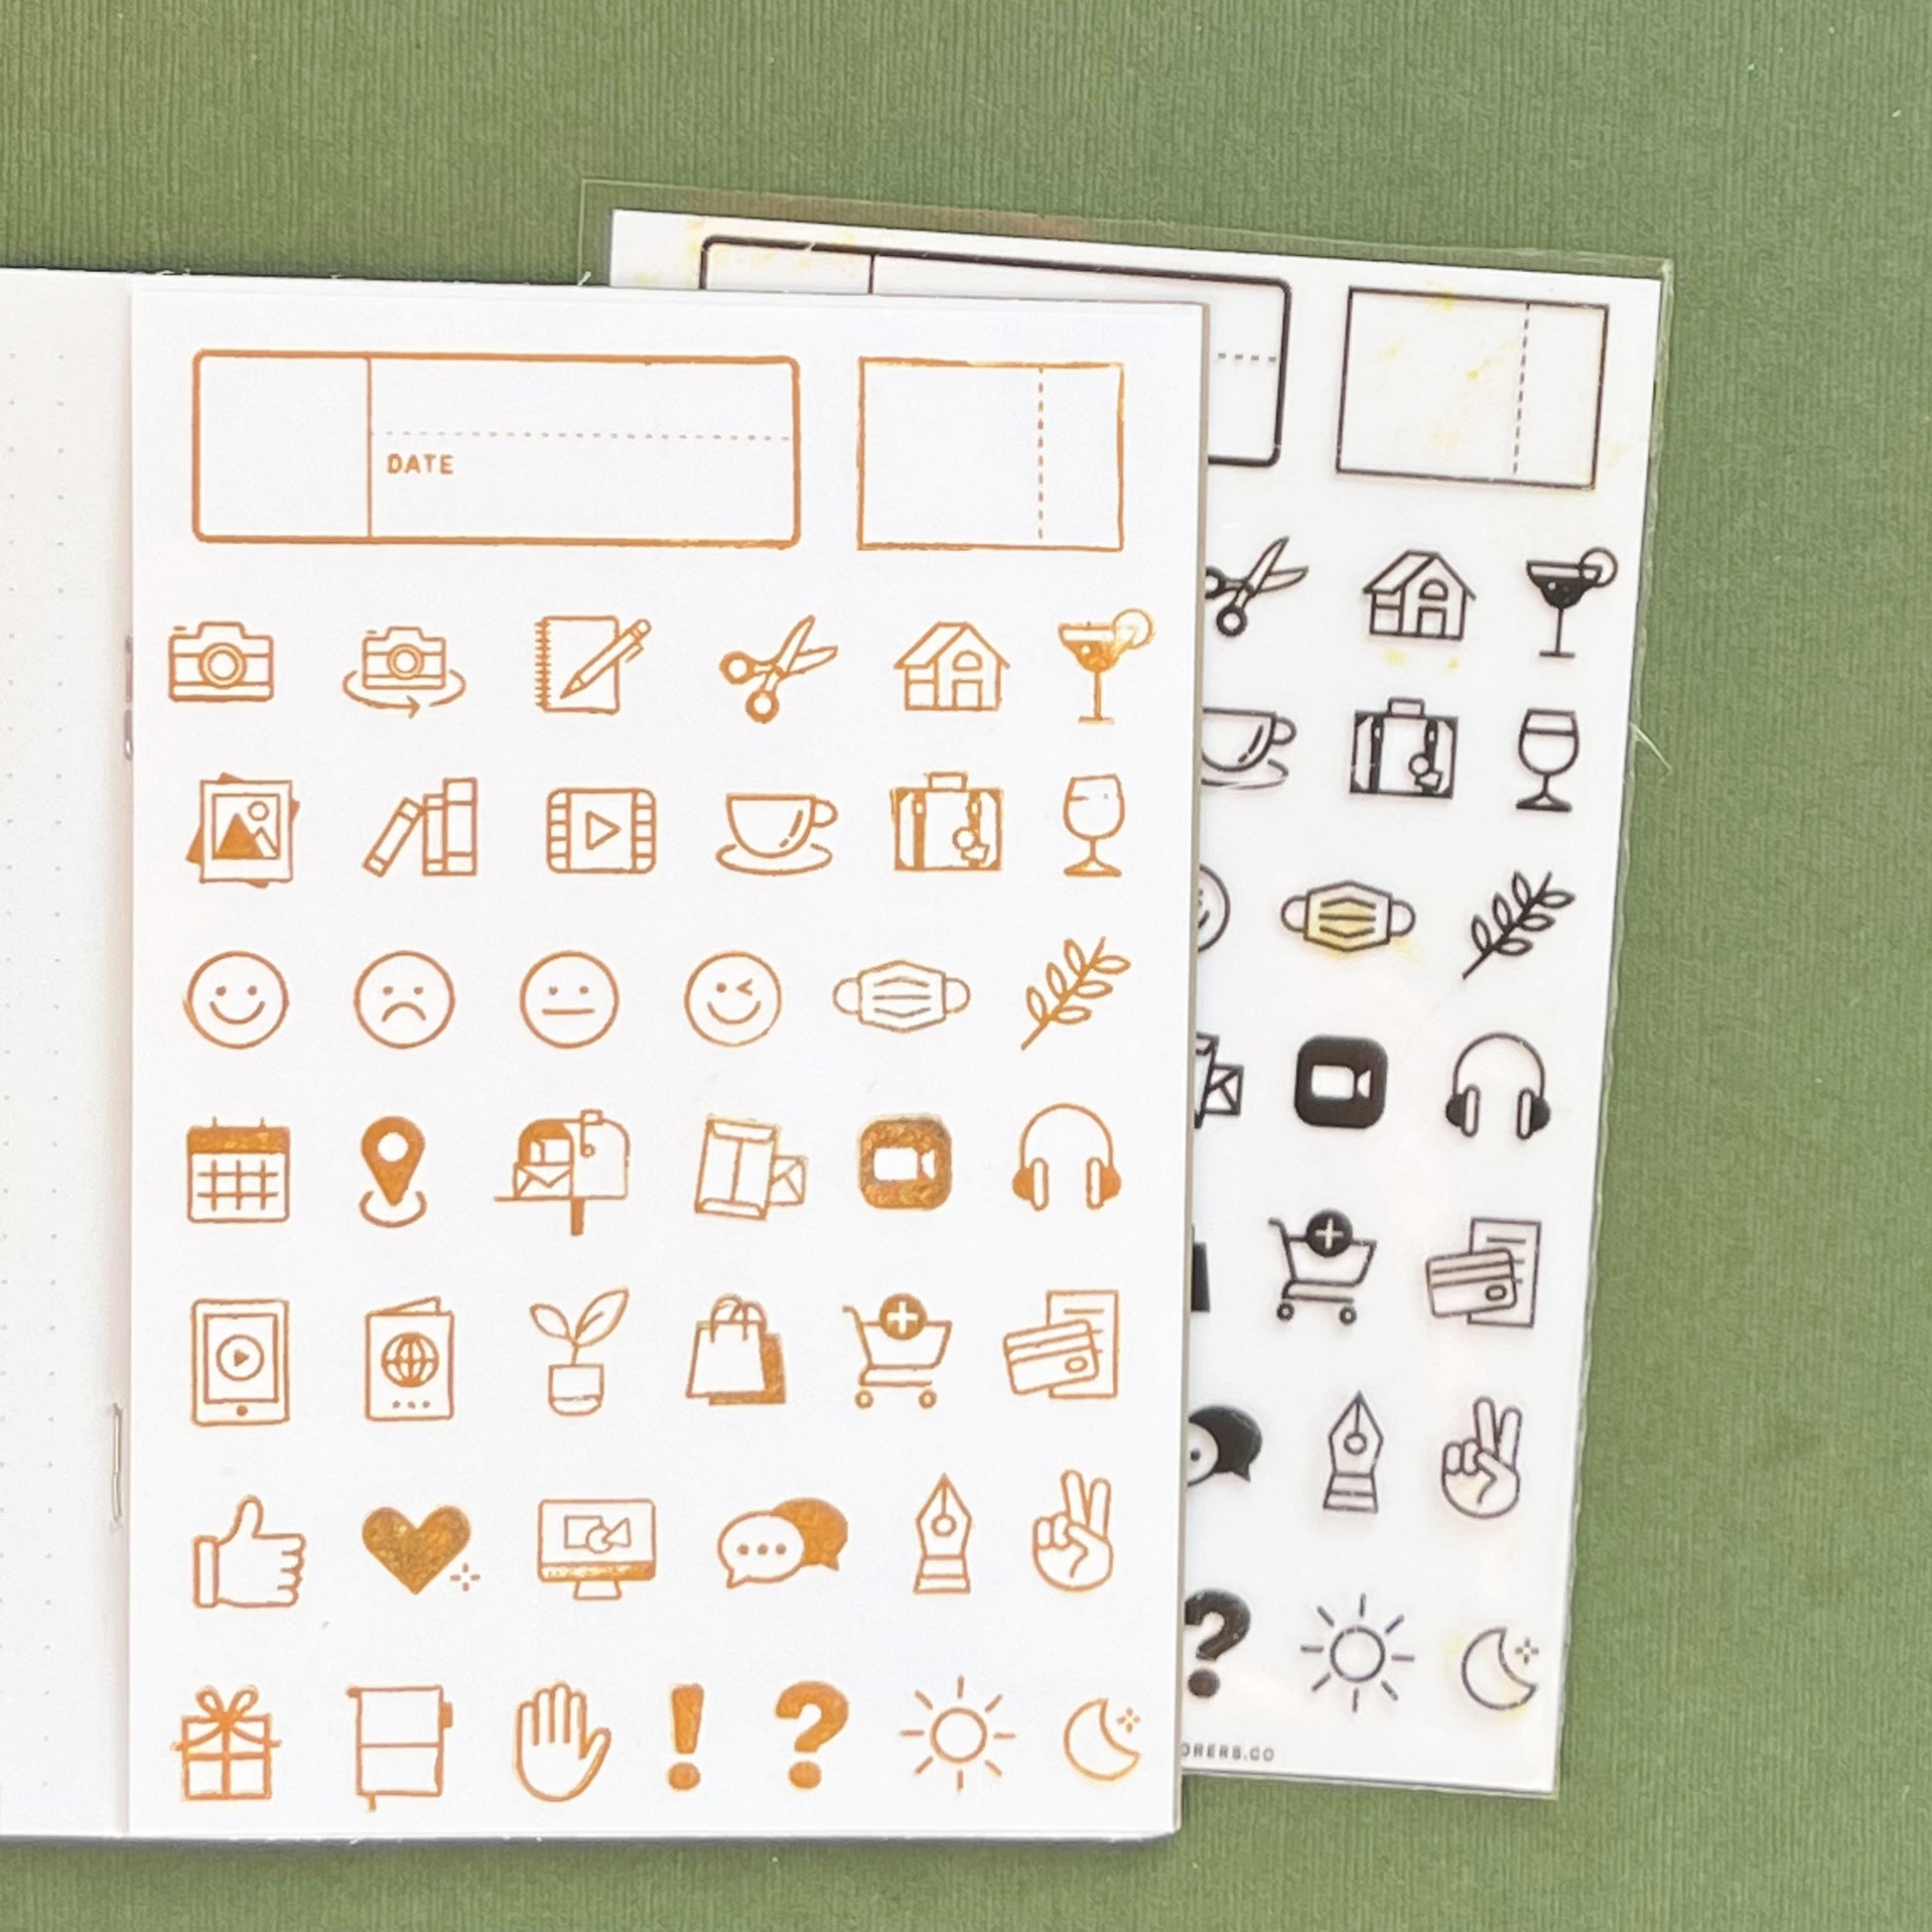 Clear Planner Stamps - Days of the Week and Icons – Mint Maker